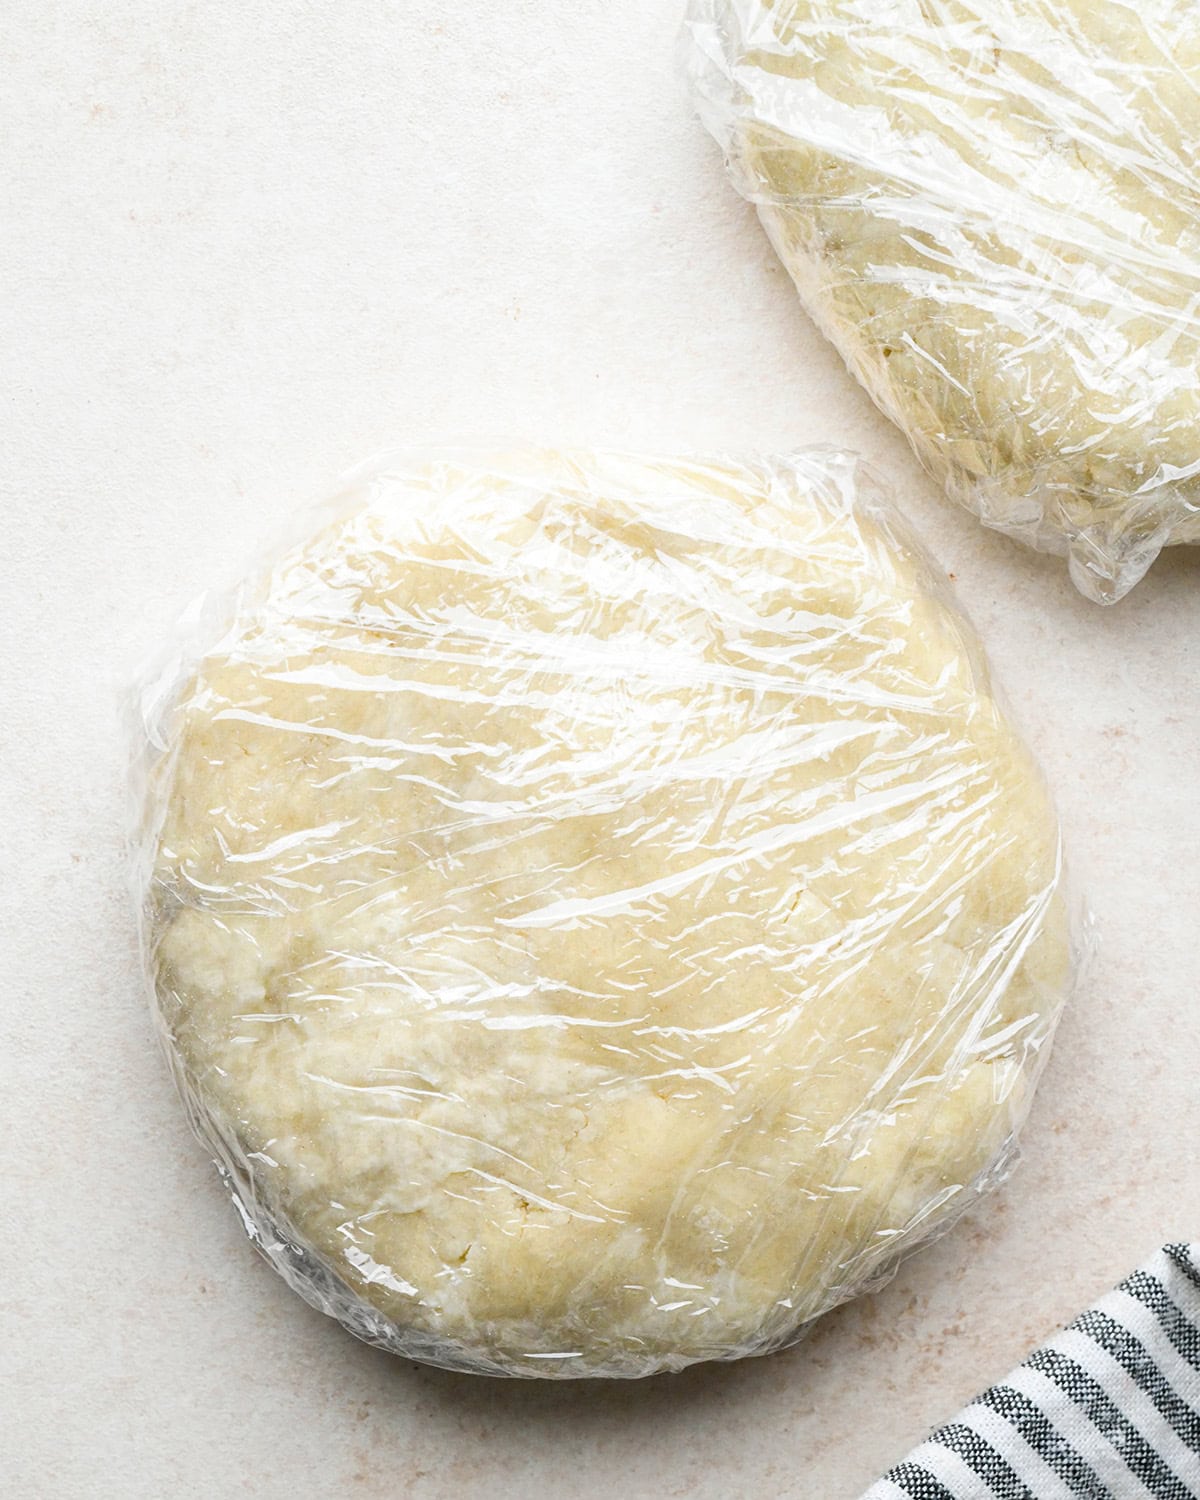 quiche crust dough formed into two round discs wrapped in plastic wrap